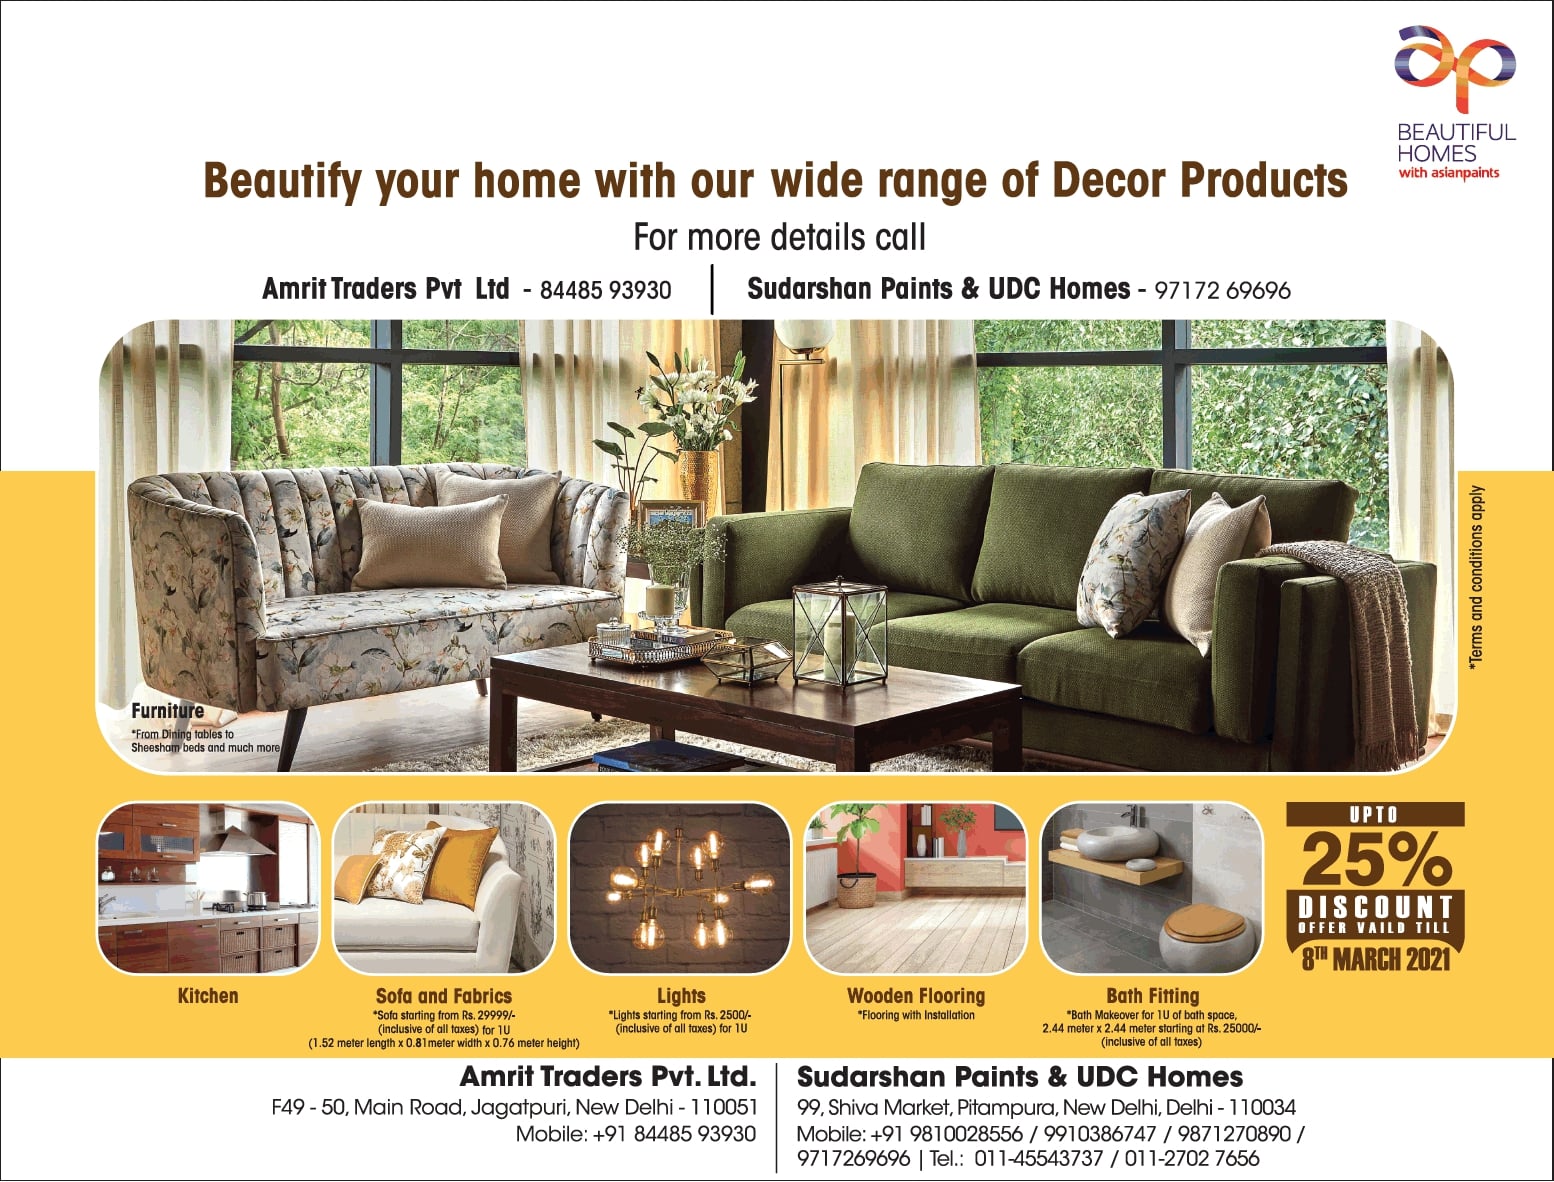 asian-paints-beautify-your-home-with-our-wide-range-of-decor-products-ad-times-of-india-delhi-26-02-2021